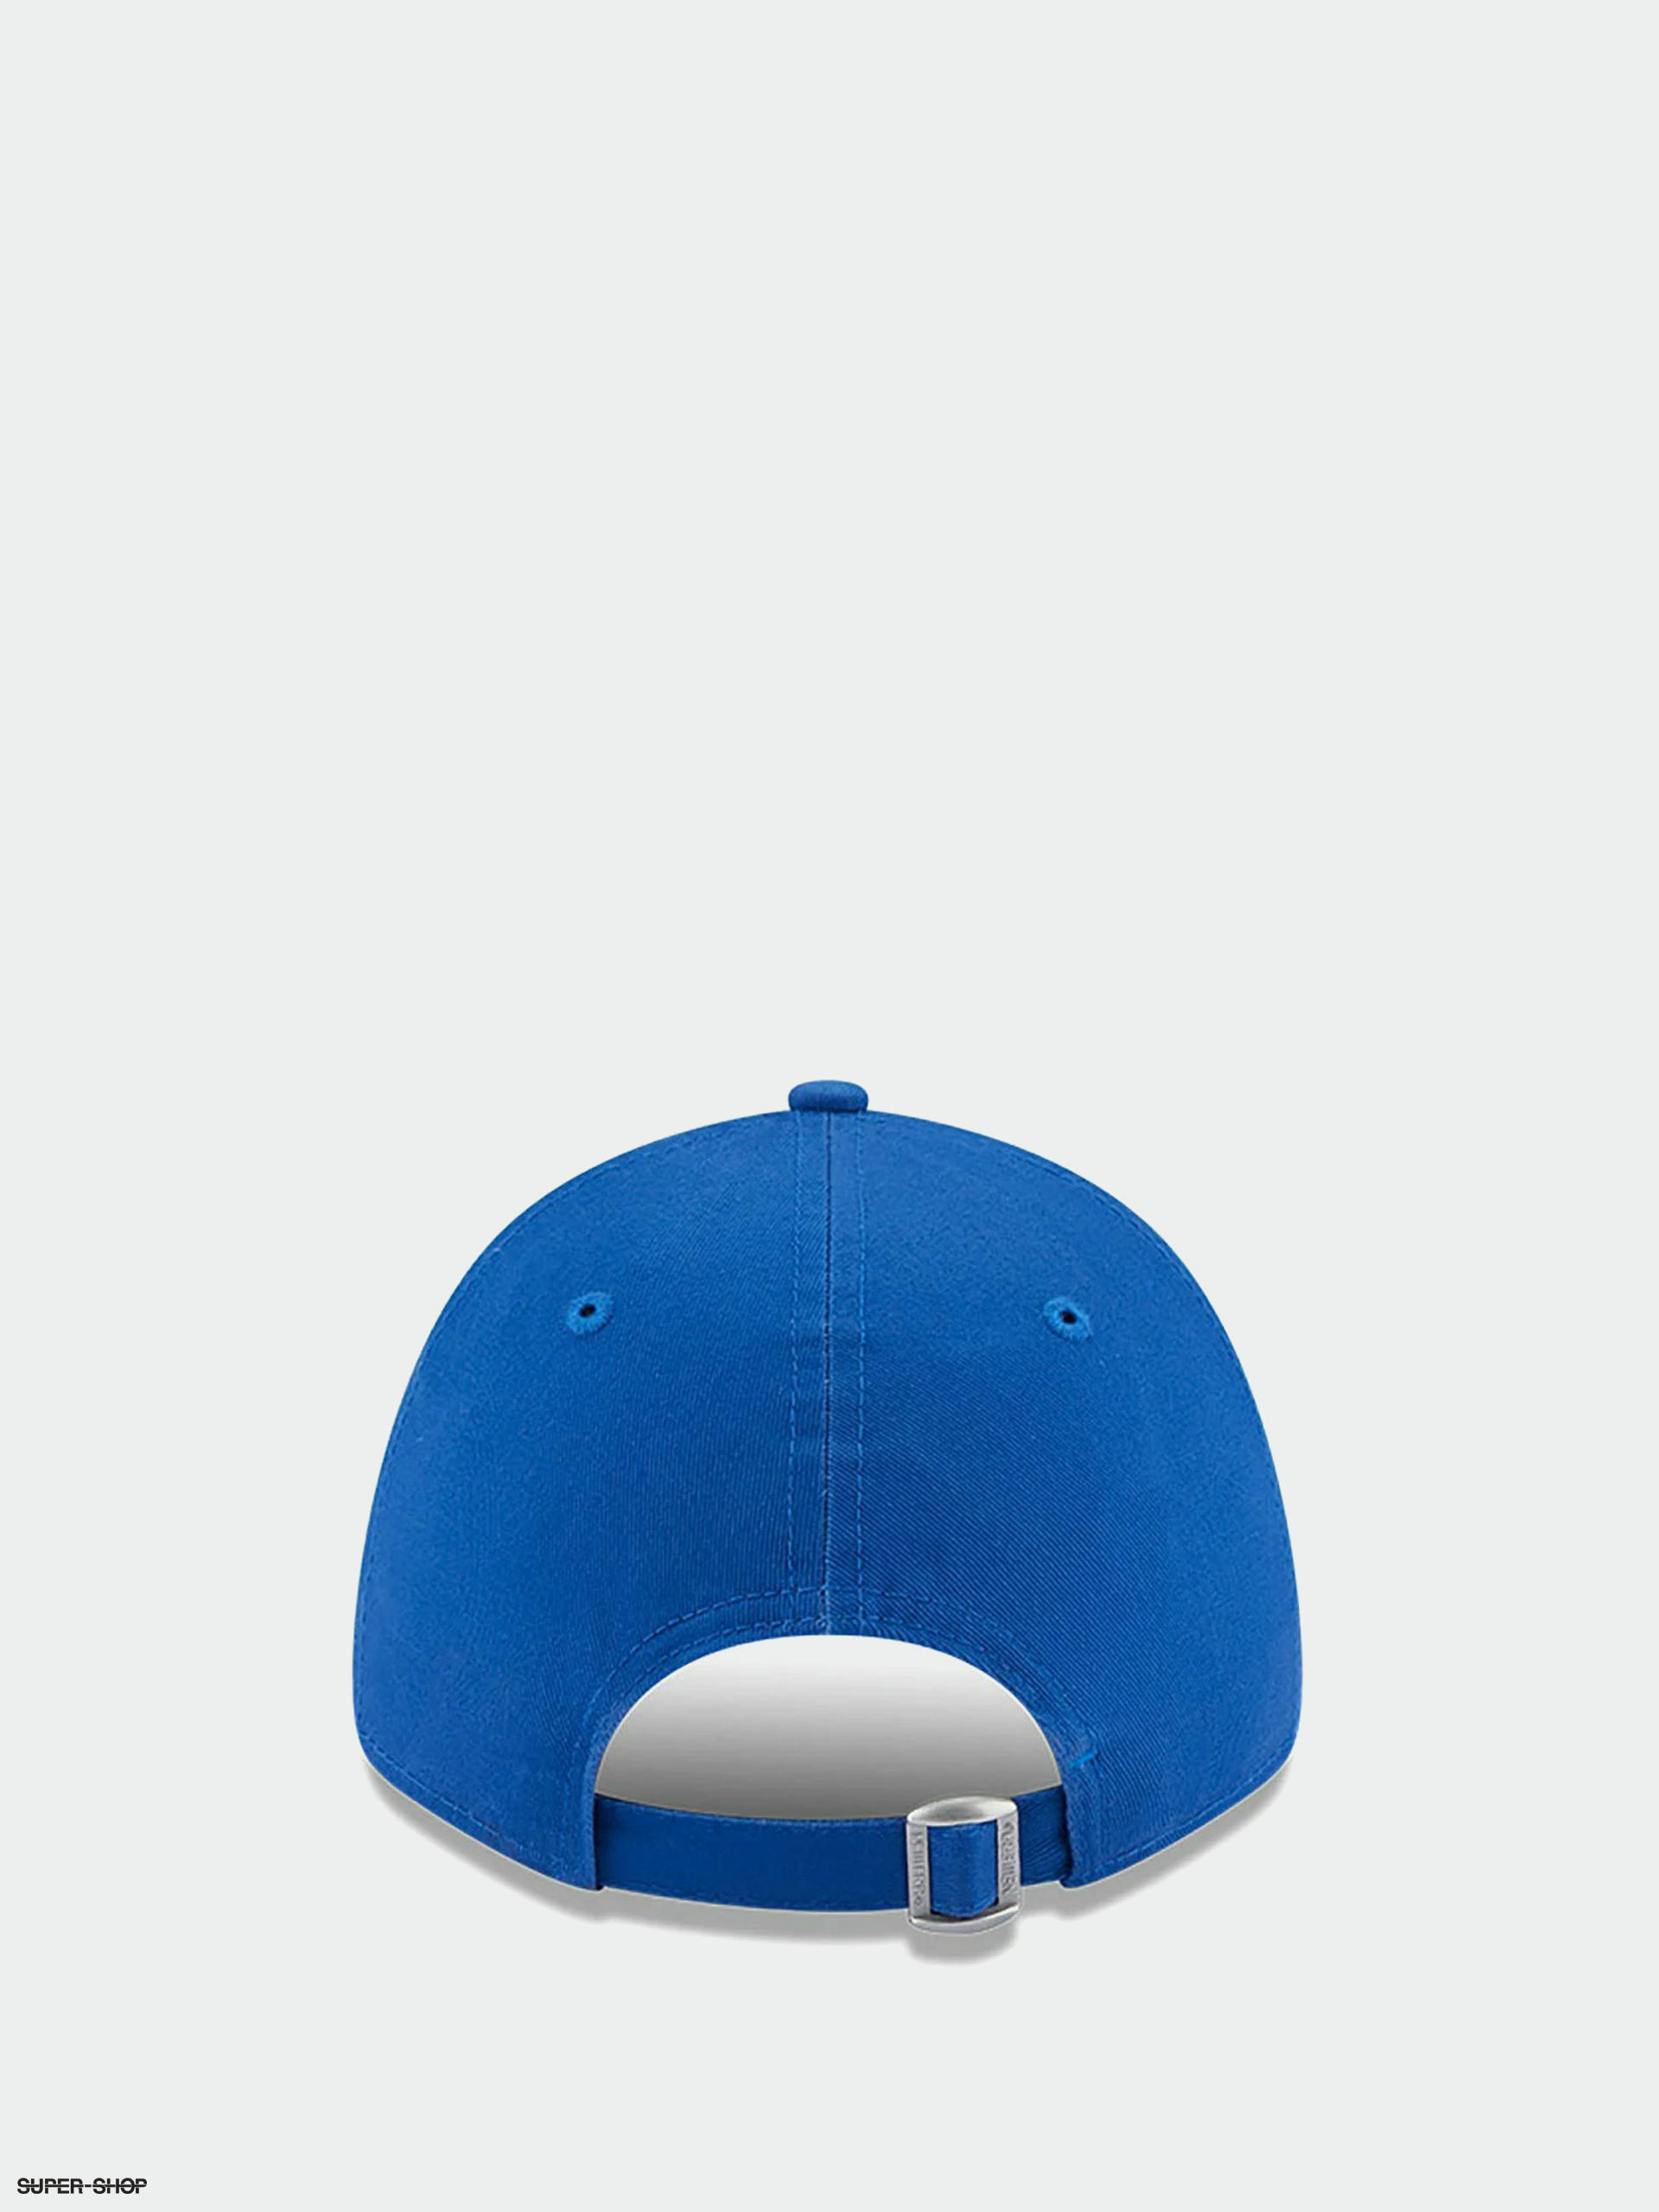 New Era 9Forty The League Game Cap - Los Angeles Dodgers/Blue